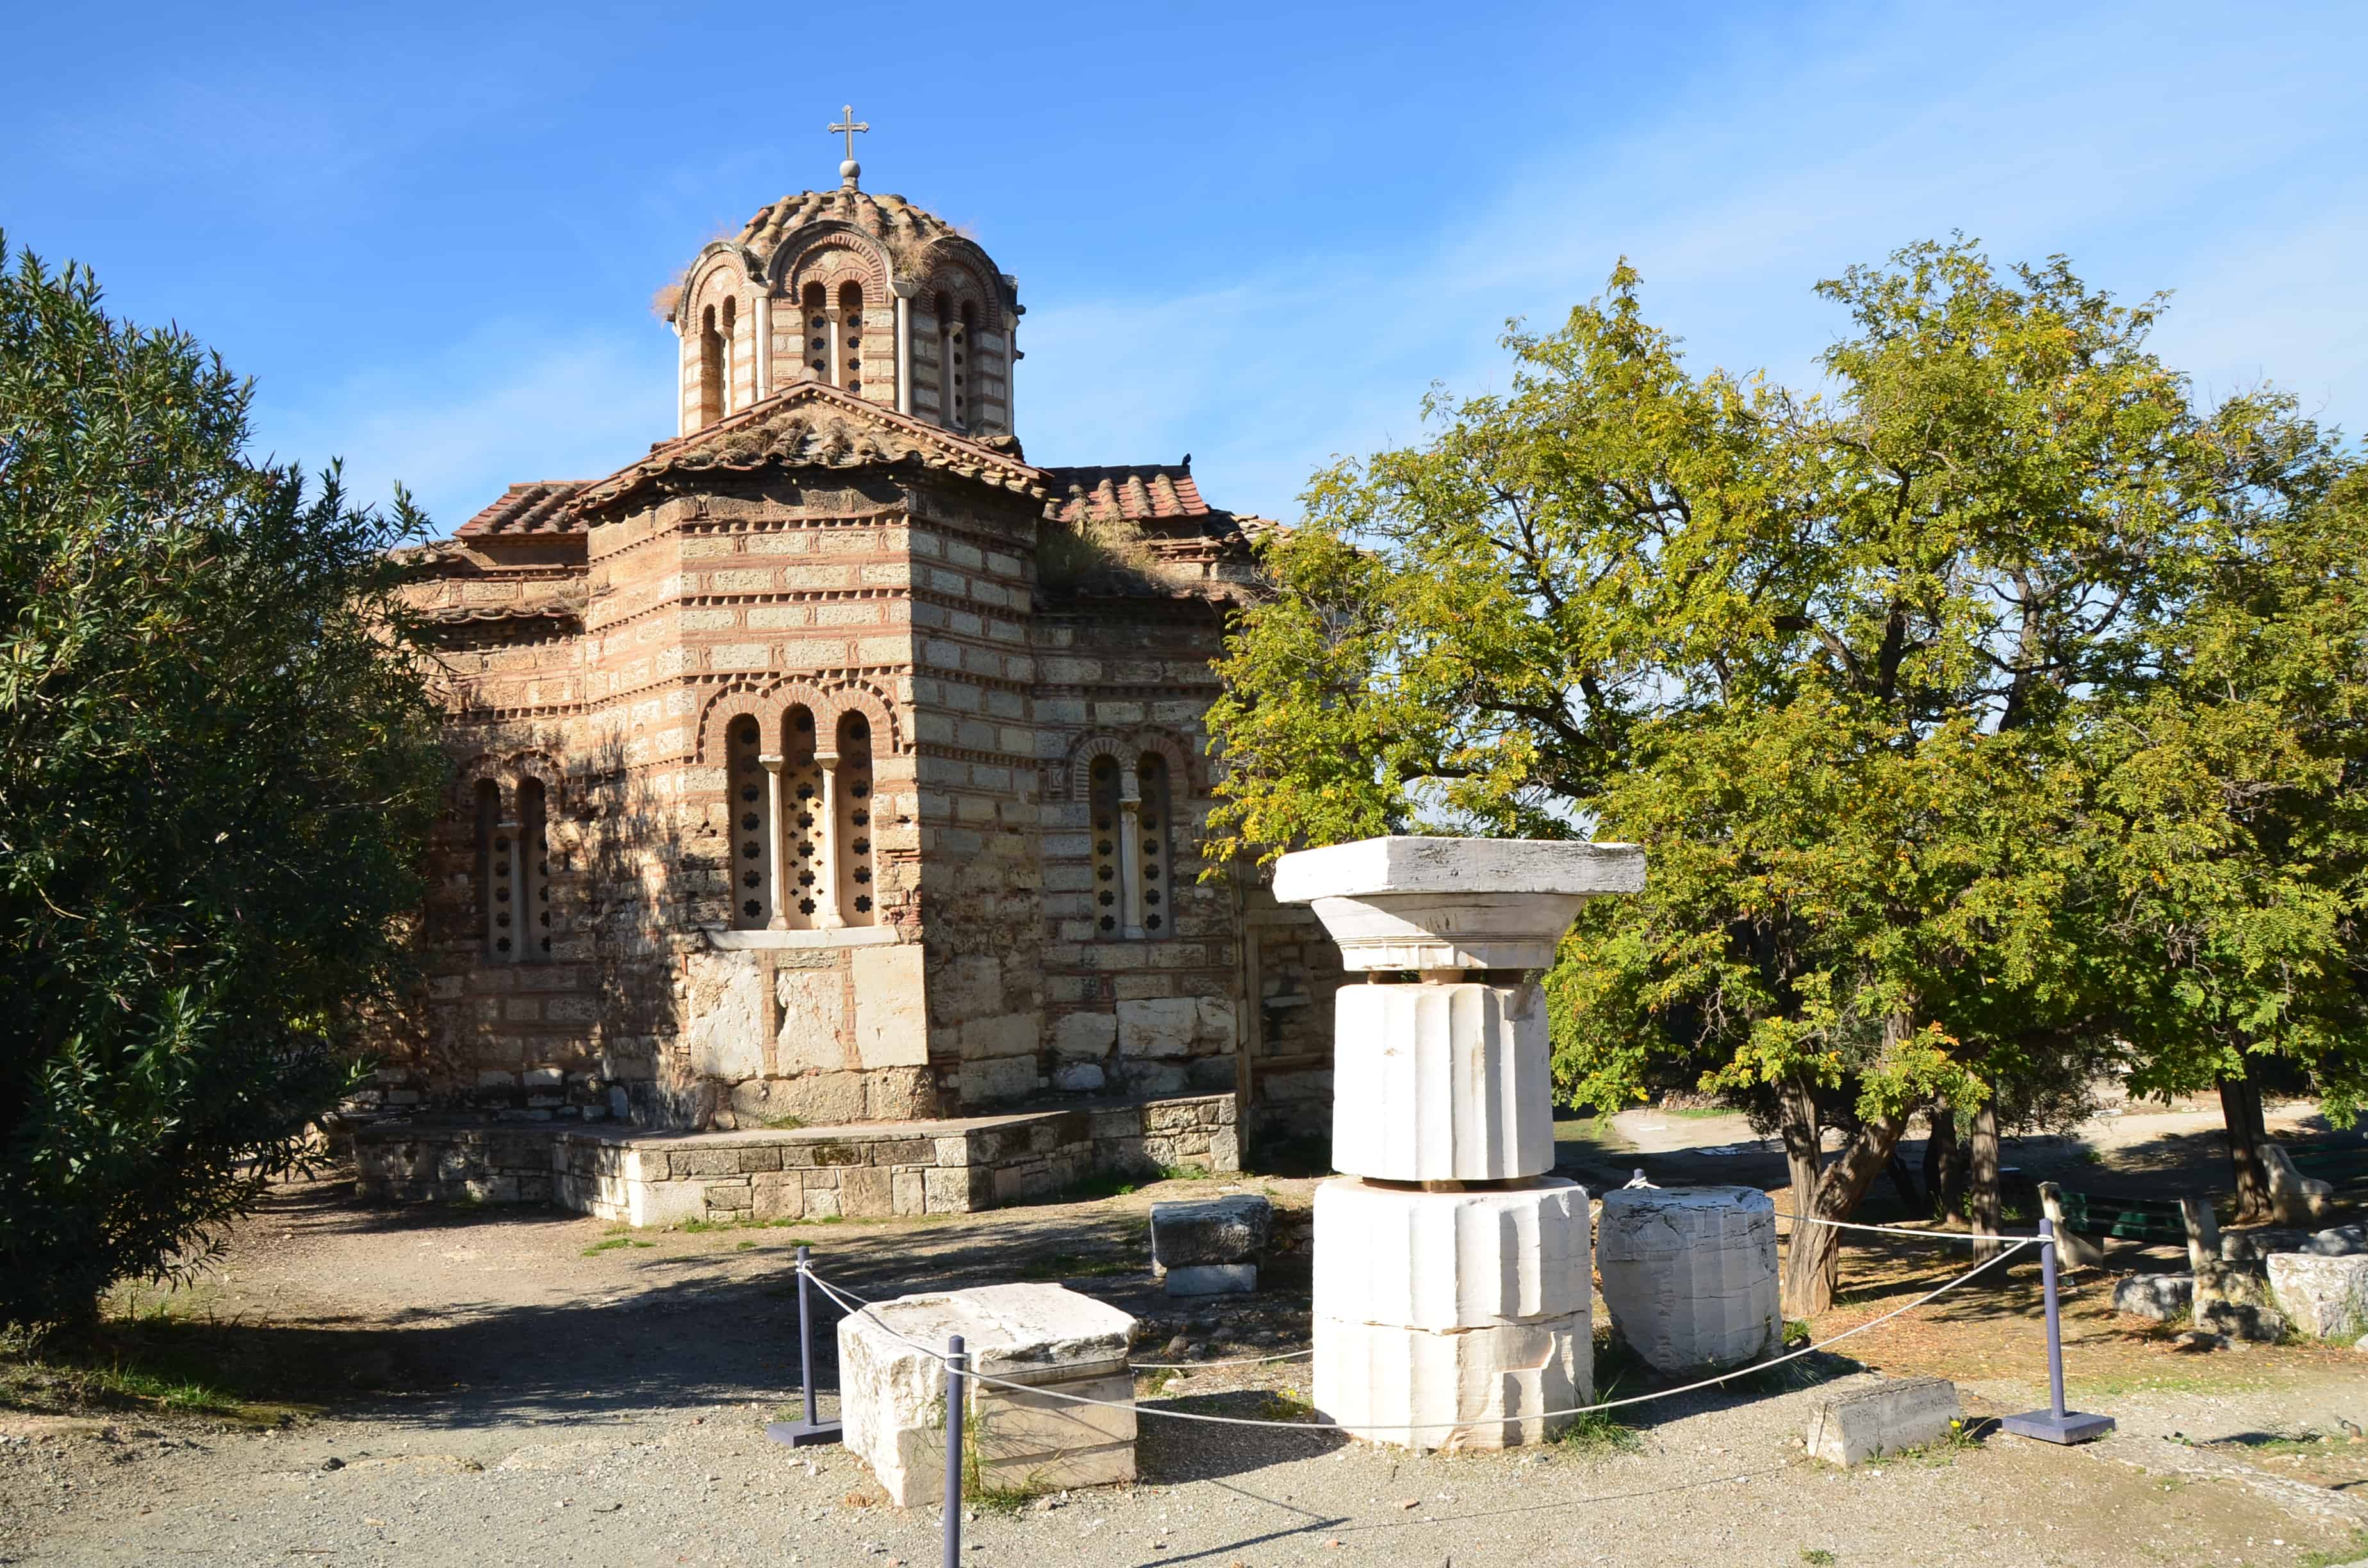 Southeast Temple and the Church of the Holy Apostles at the Agora in Athens, Greece